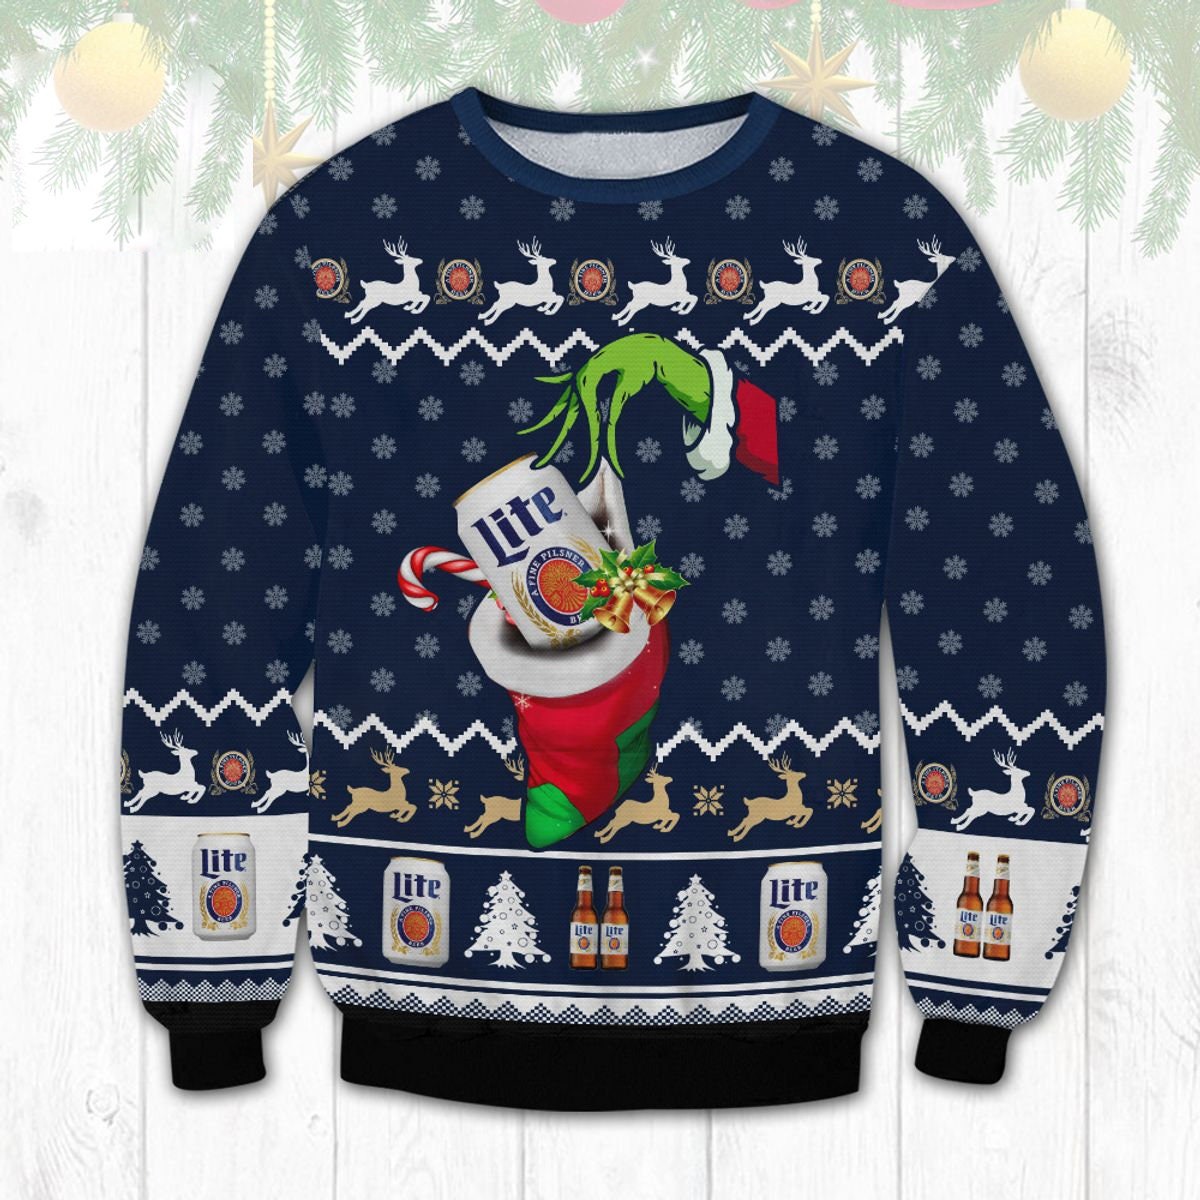 Ugly Grinch Christmas Sweater The Hand Miller Lite Beer